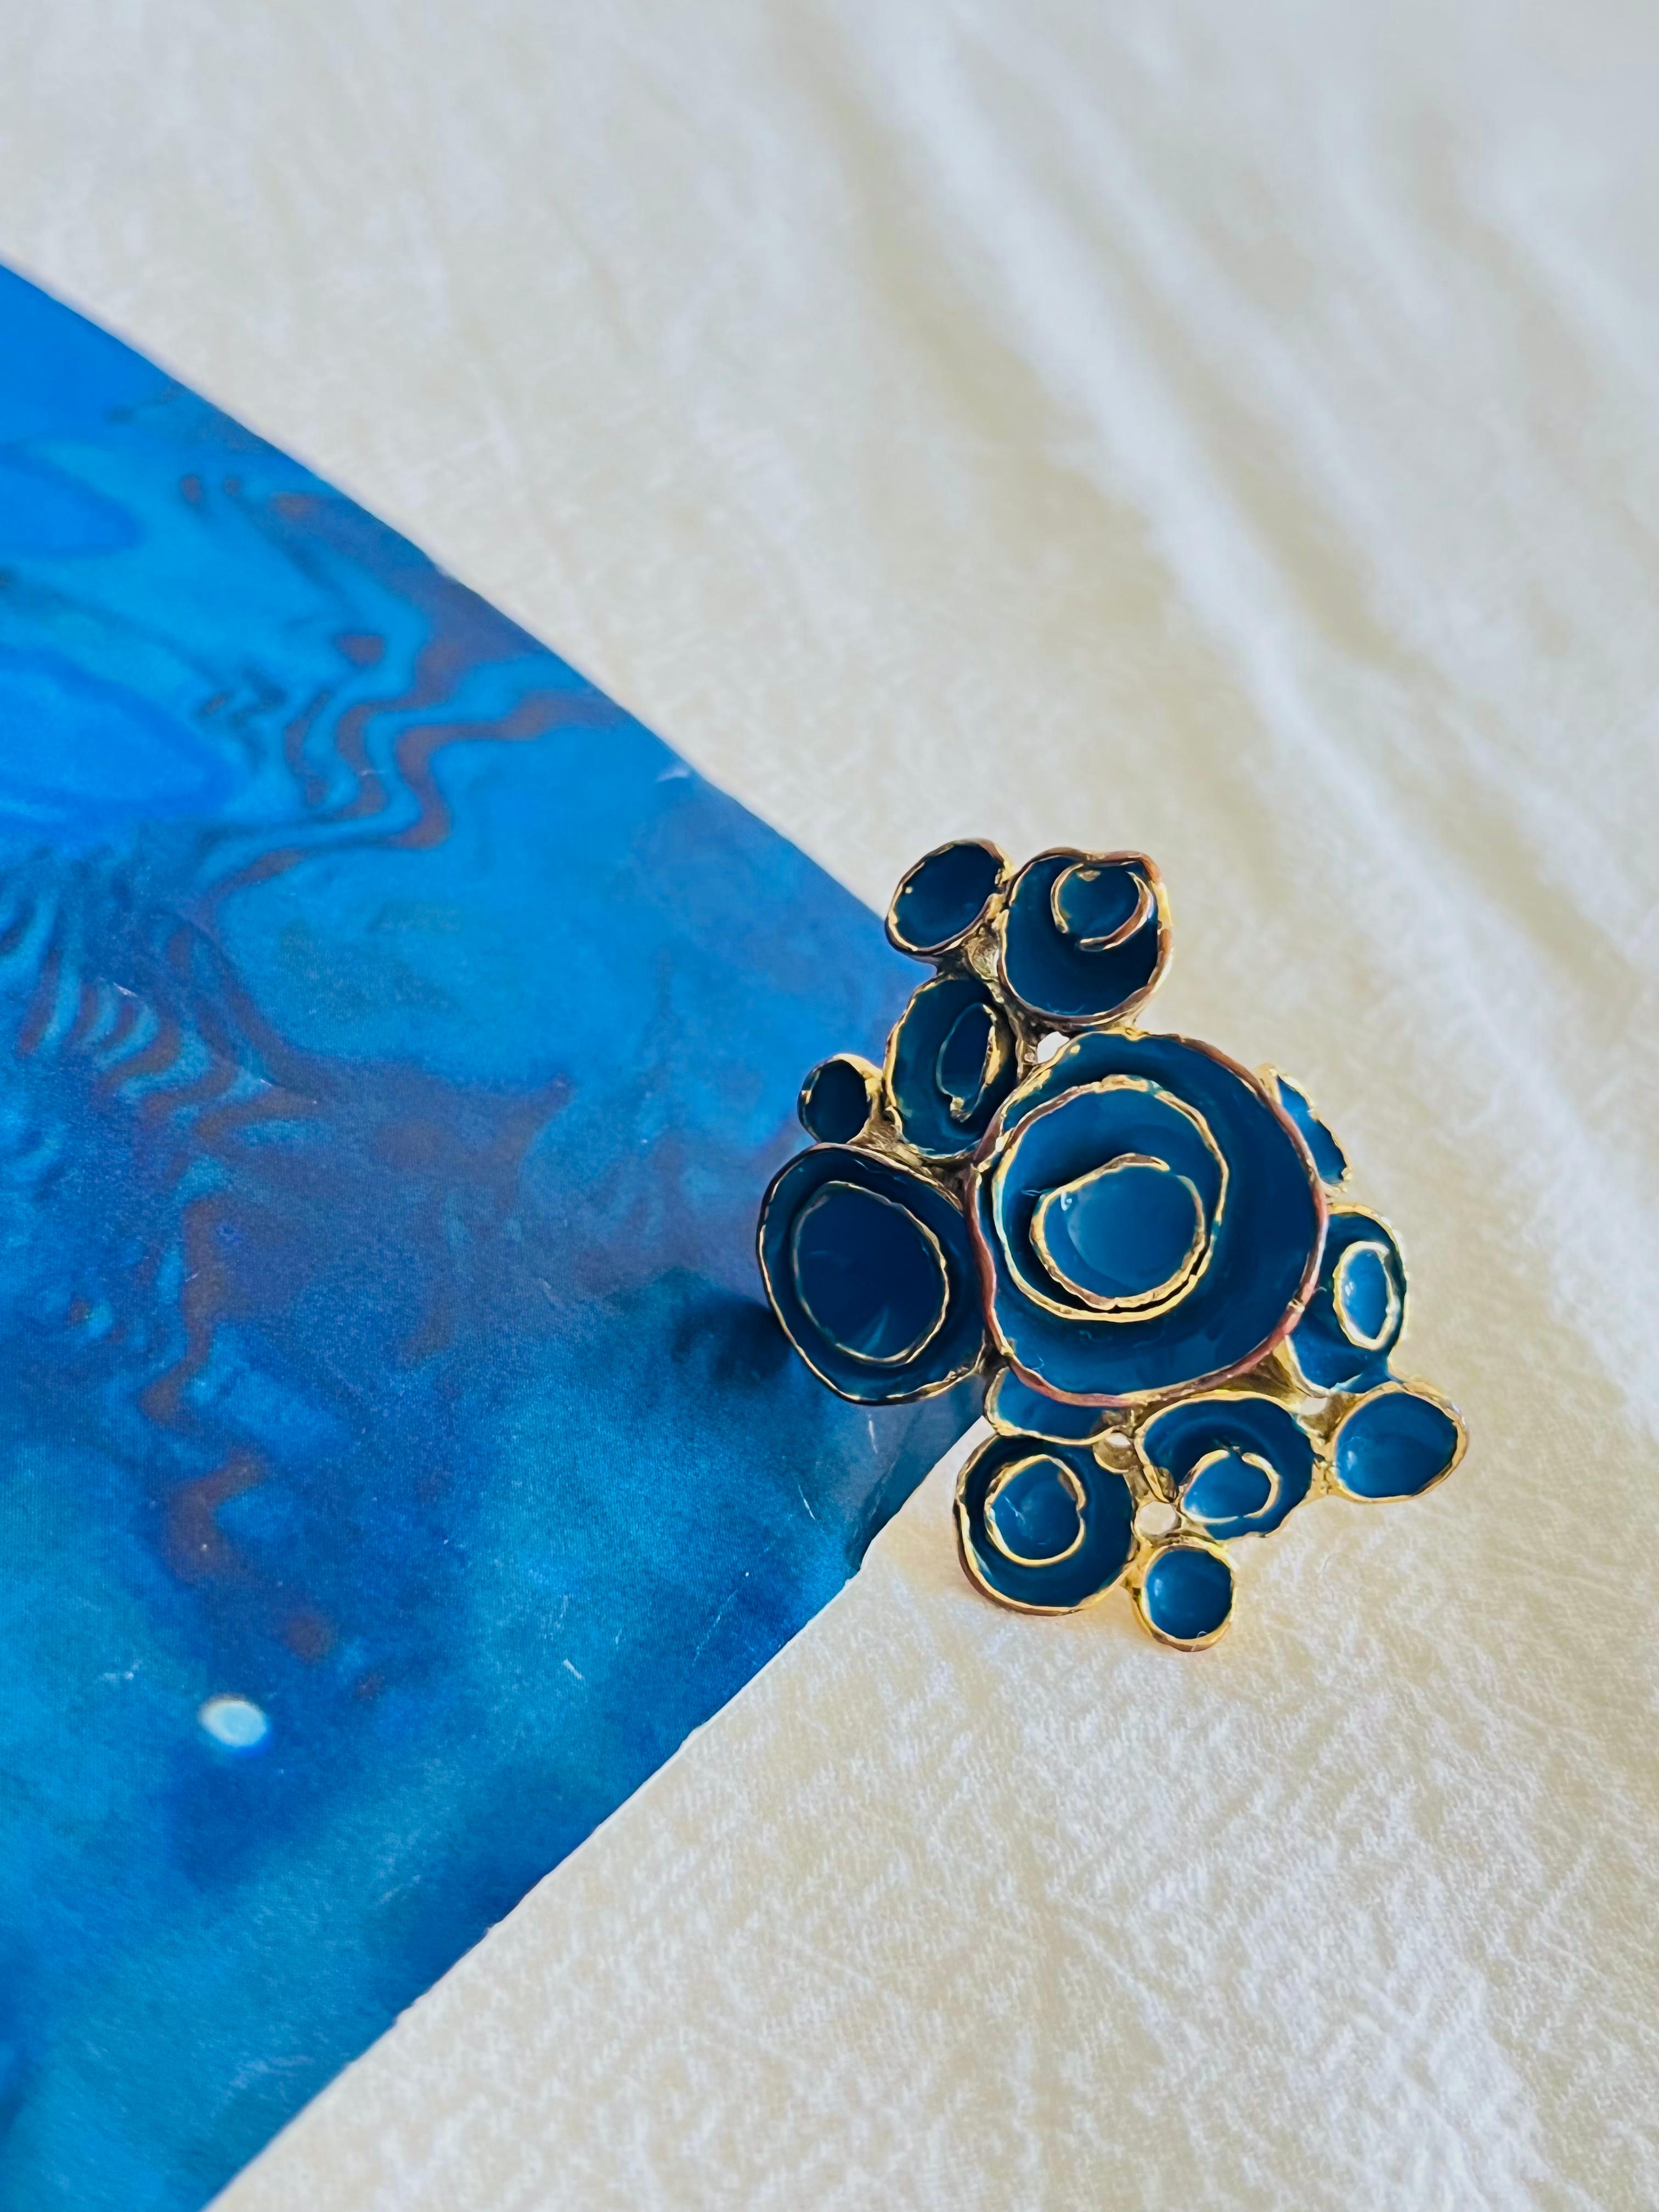 Yves Saint Laurent YSL Arty Navy Cluster Flowers Statement Chunky Ring, Size 6, Gold Tone

Very good condition. Light scratches and colour loss at back. 100% Genuine.

Signed at the rear. Vintage. Very rare to find.

UK: L/M.

_ _ _

Great for